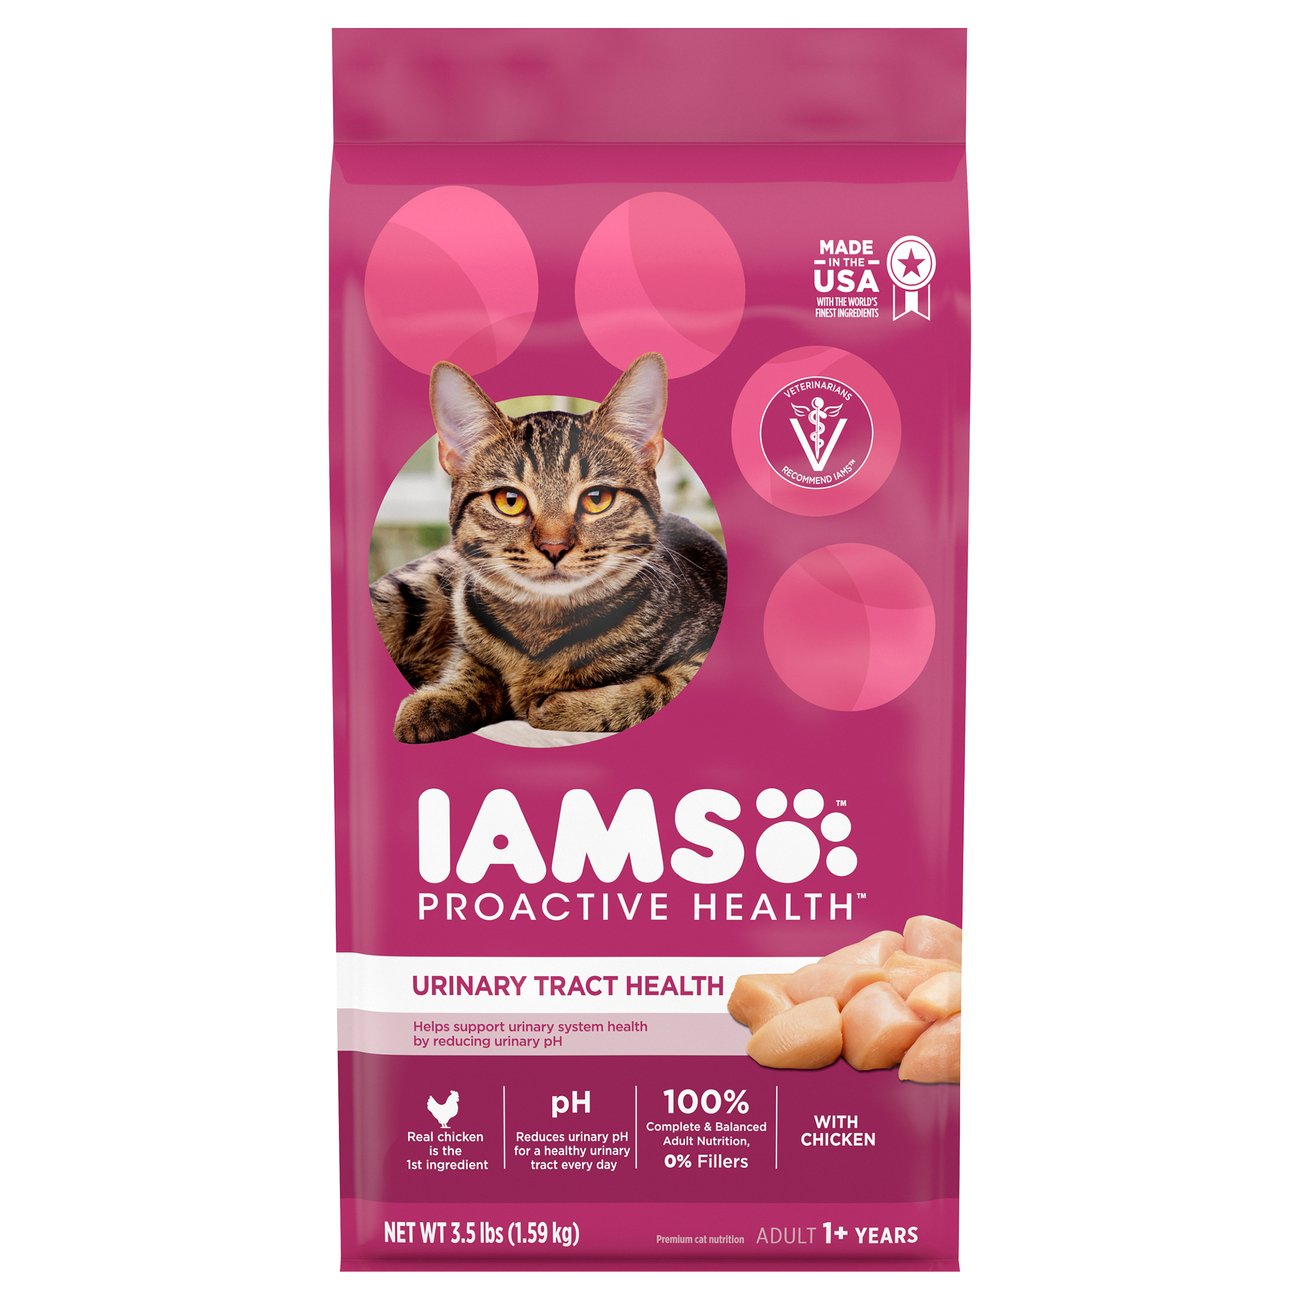 Iams Urinary Tract Health Adult Cat Food Shop Cats at HEB